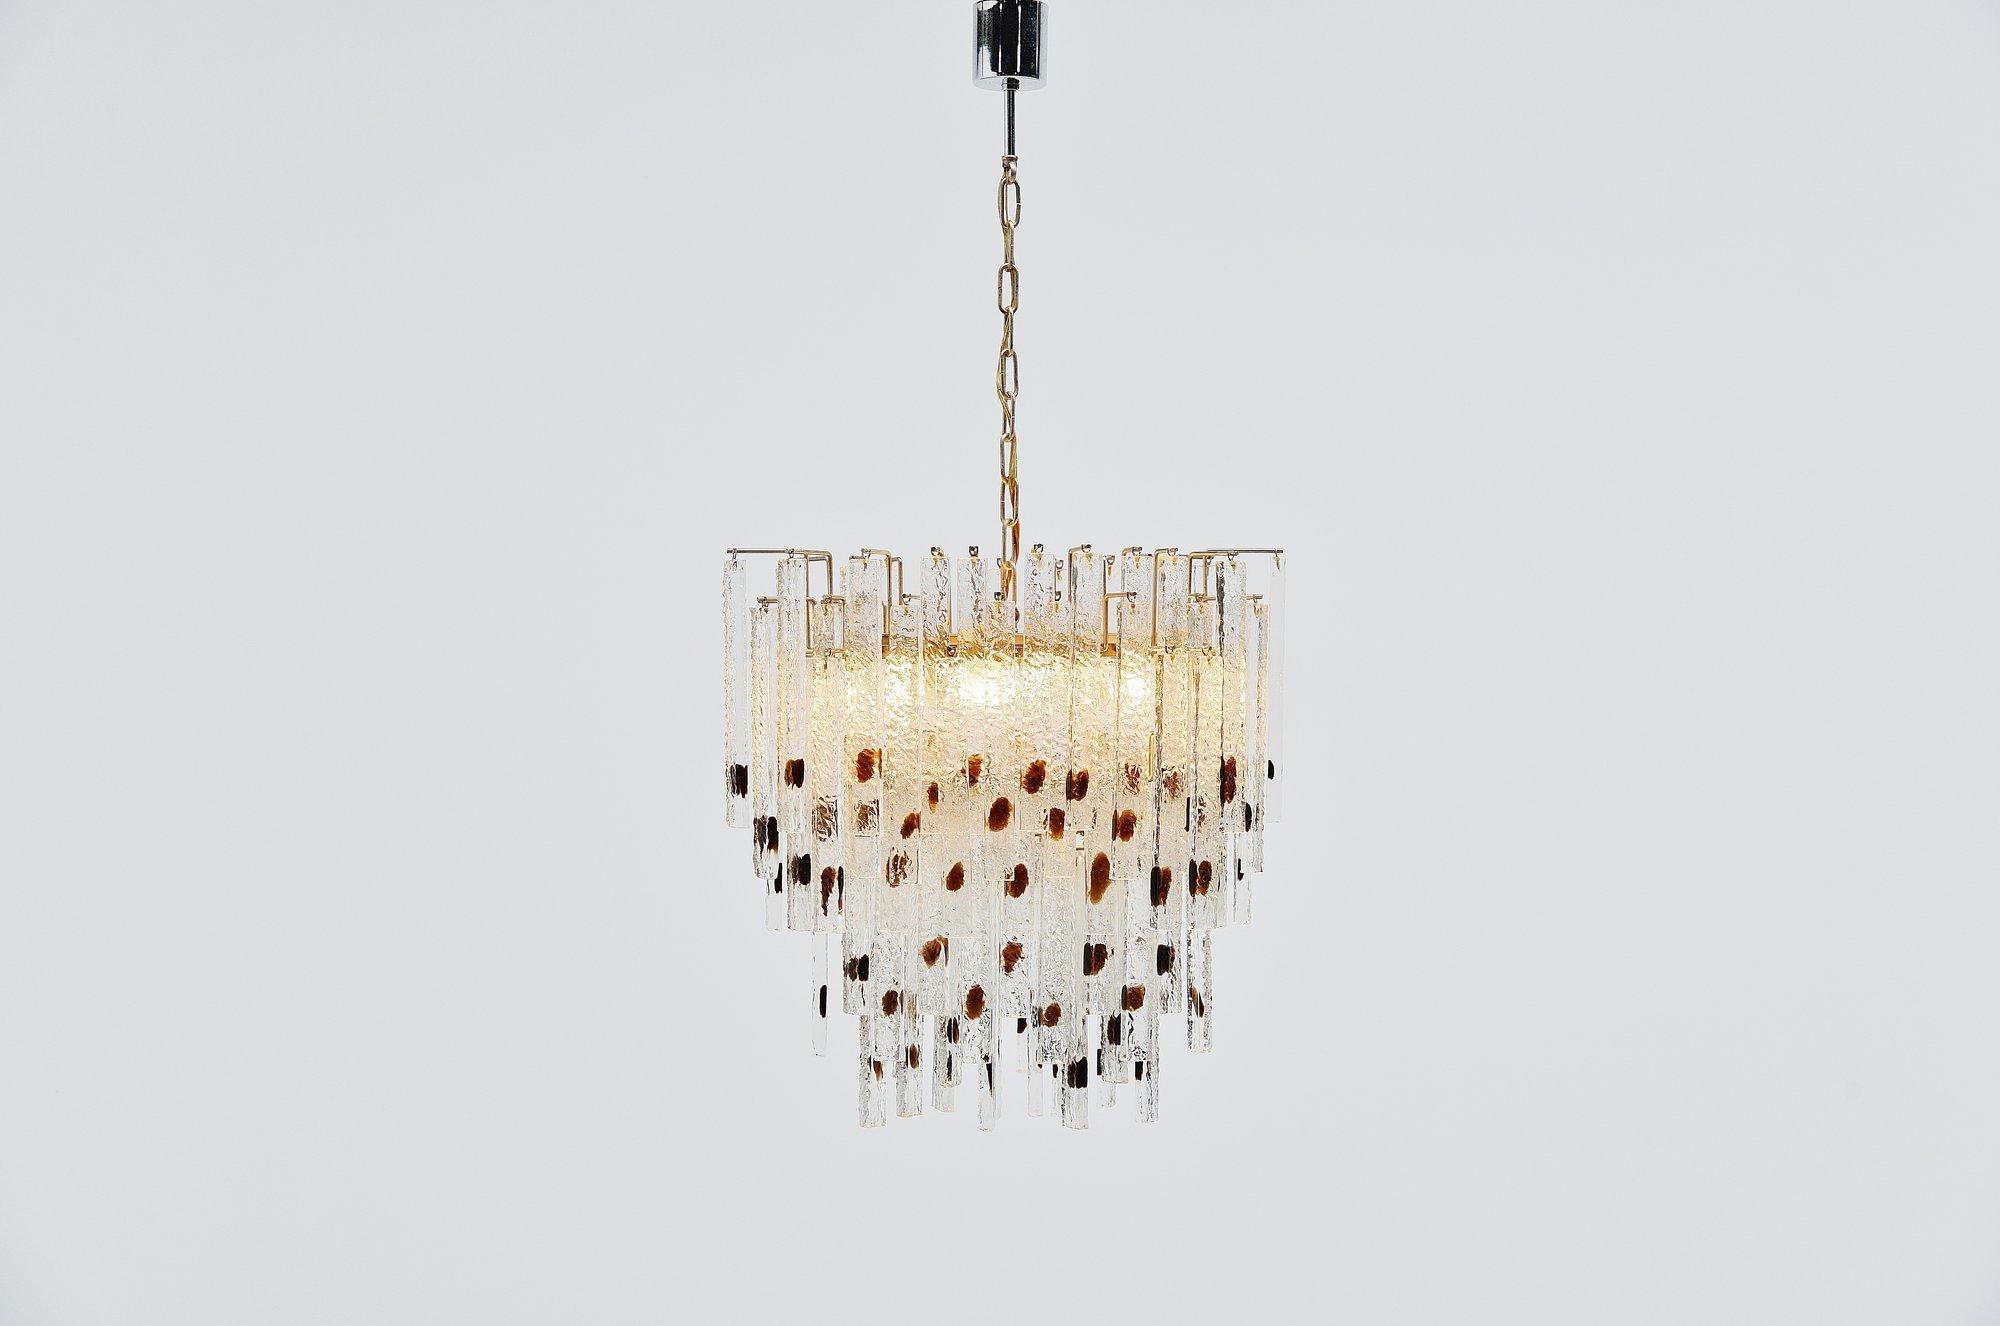 Very nice large and impressive chandelier designed by Paolo Venini and manufactured by Venini Murano, Italy, 1960. This chandelier has 95 waterfall looking glass pegs which give a great diffused light effect when lit, transparent glass with brown